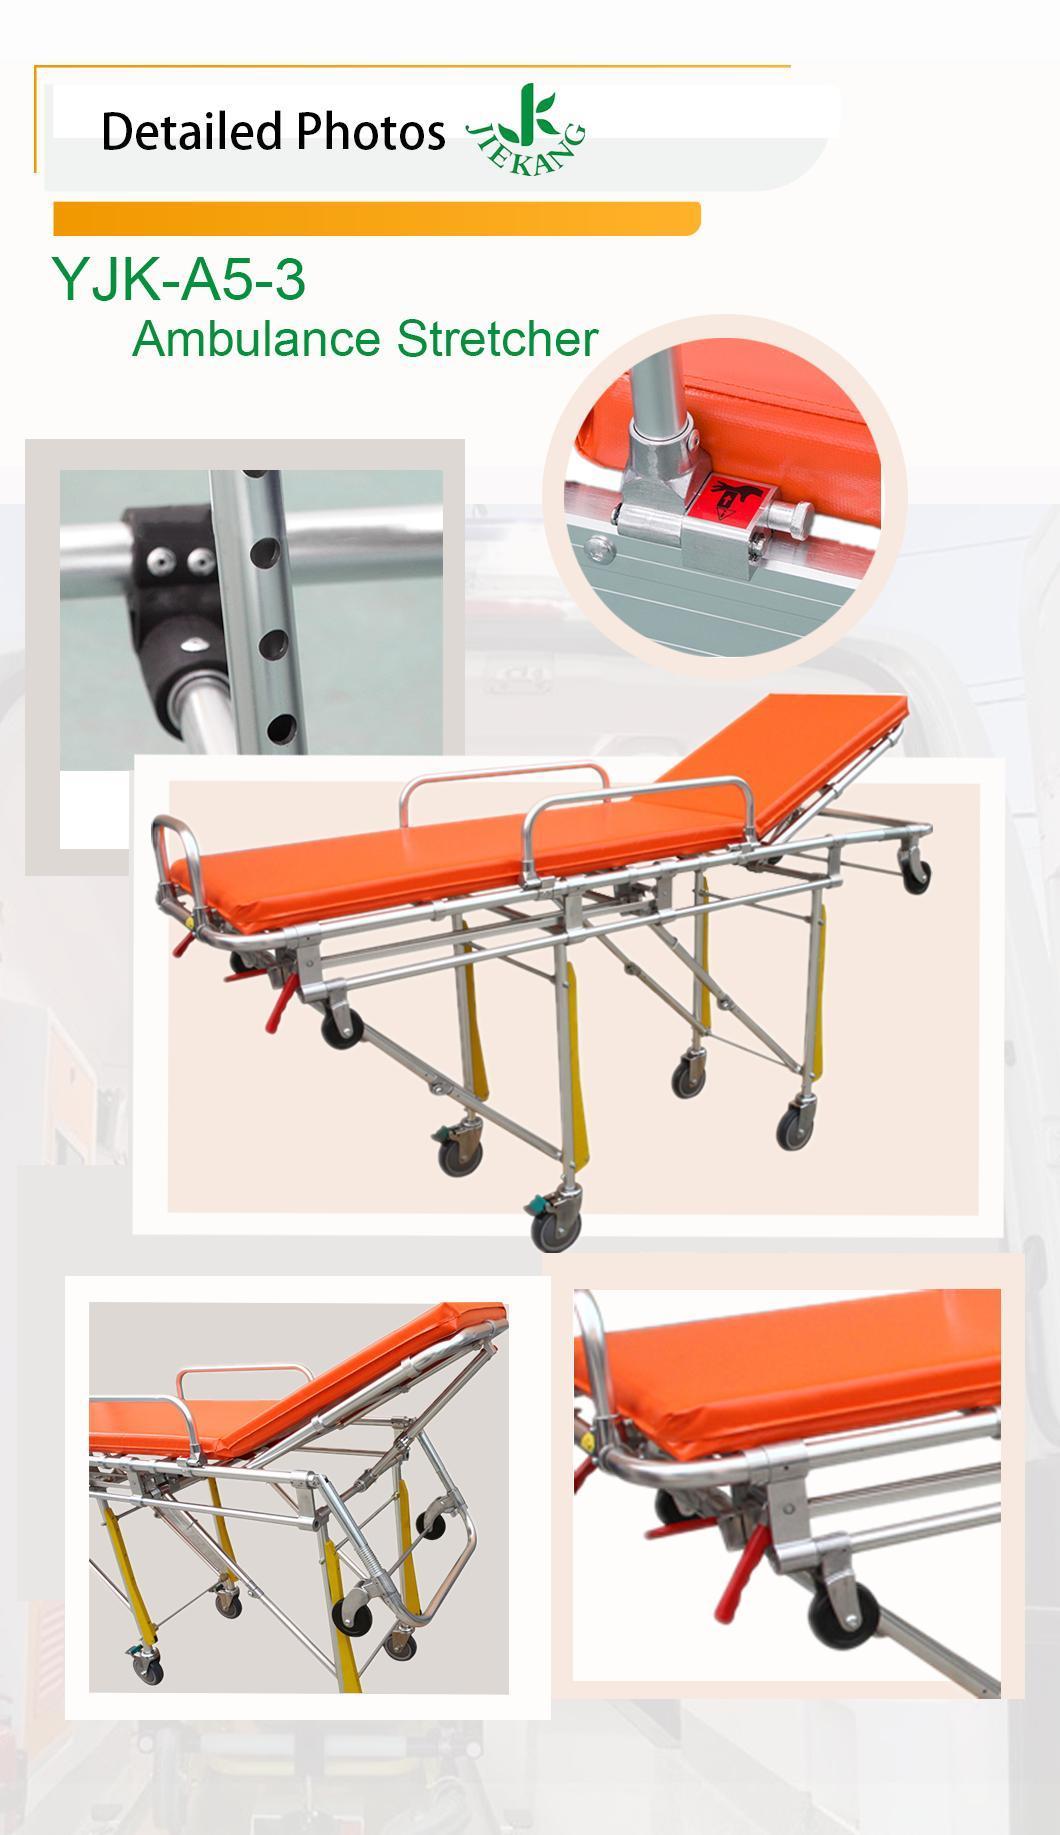 Hospital Medical Collapsible Automatic Loading Ambulance Stretcher with Wheels